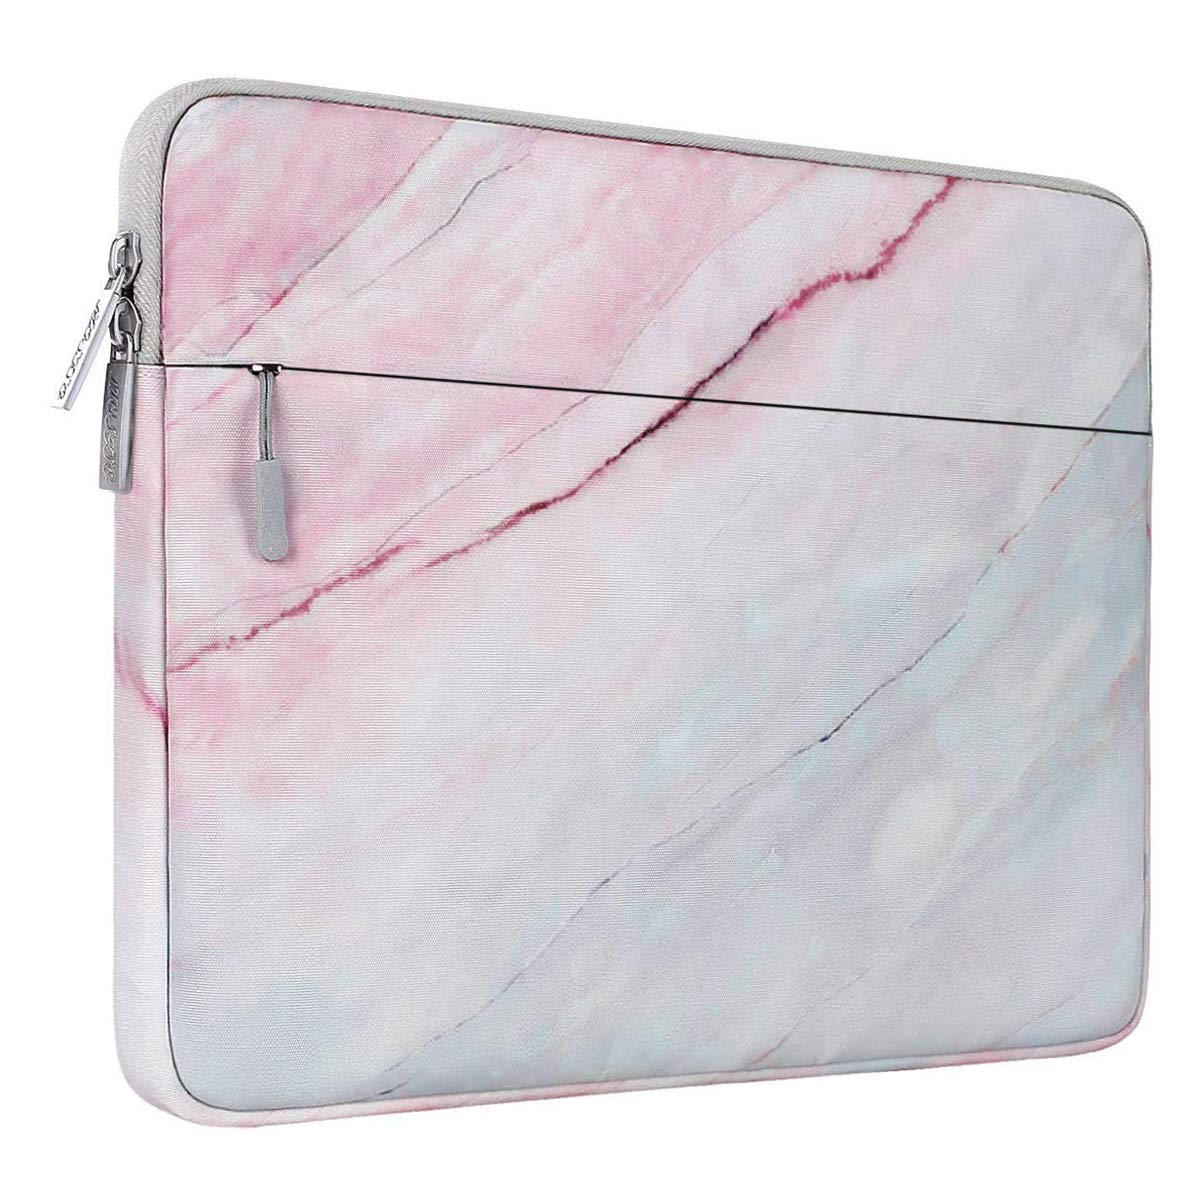 MOSISO Canvas Marble Pattern Laptop Sleeve Case Cover Bag 13 Inch- Pink & Blue